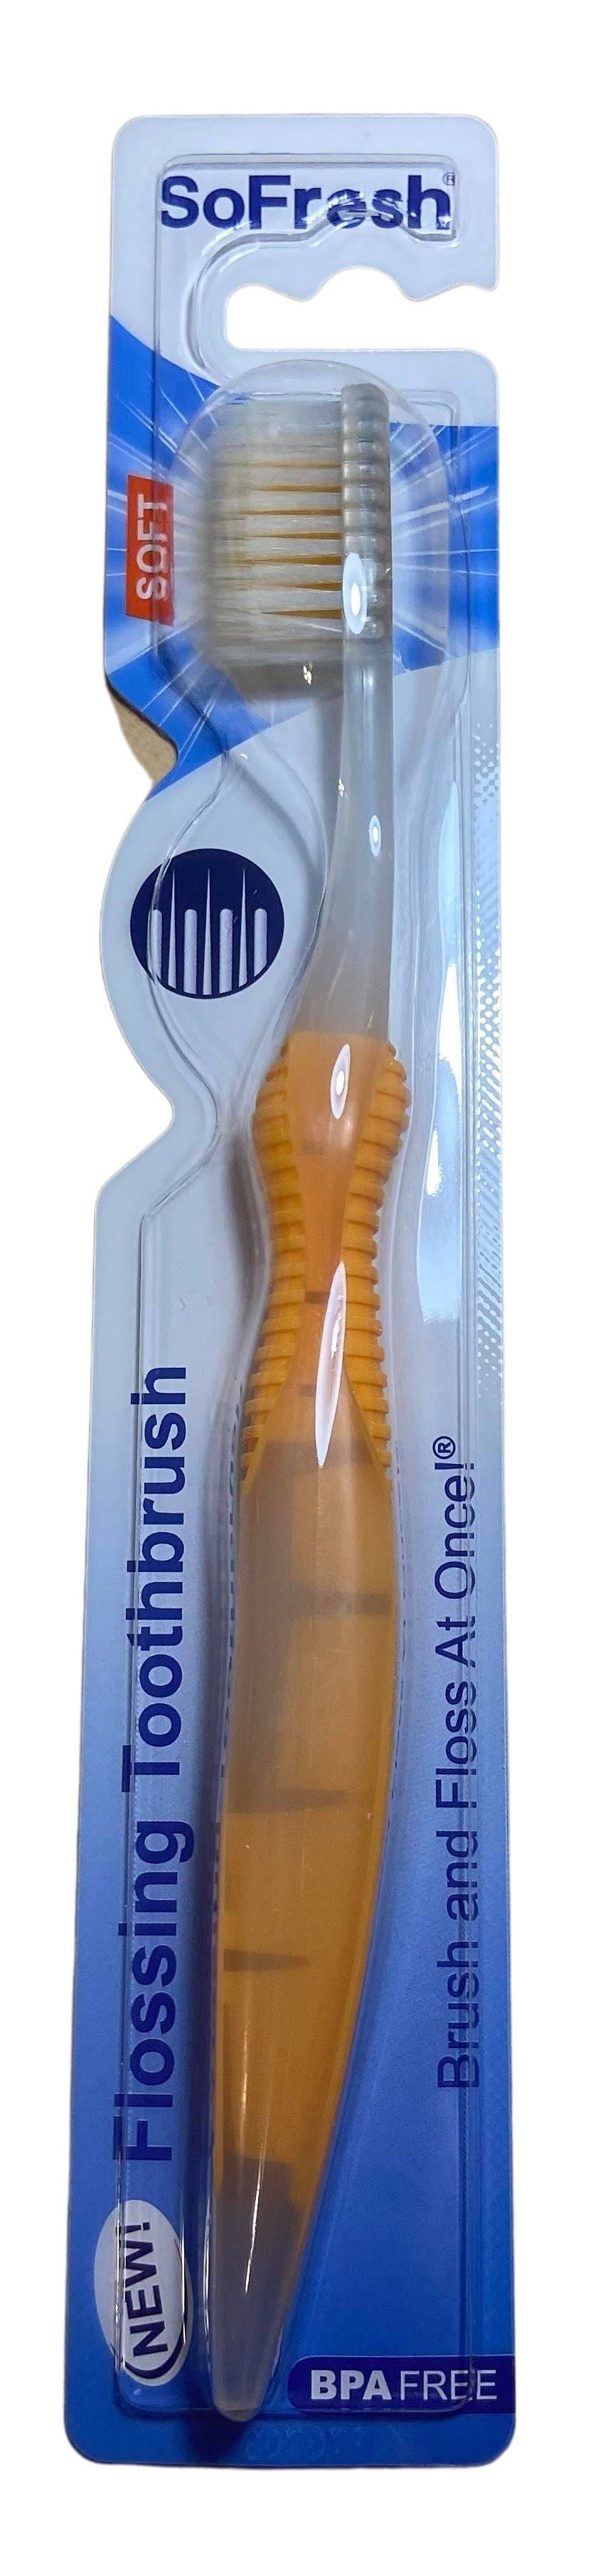 Flossing Toothbrush - Country Life Natural Foods